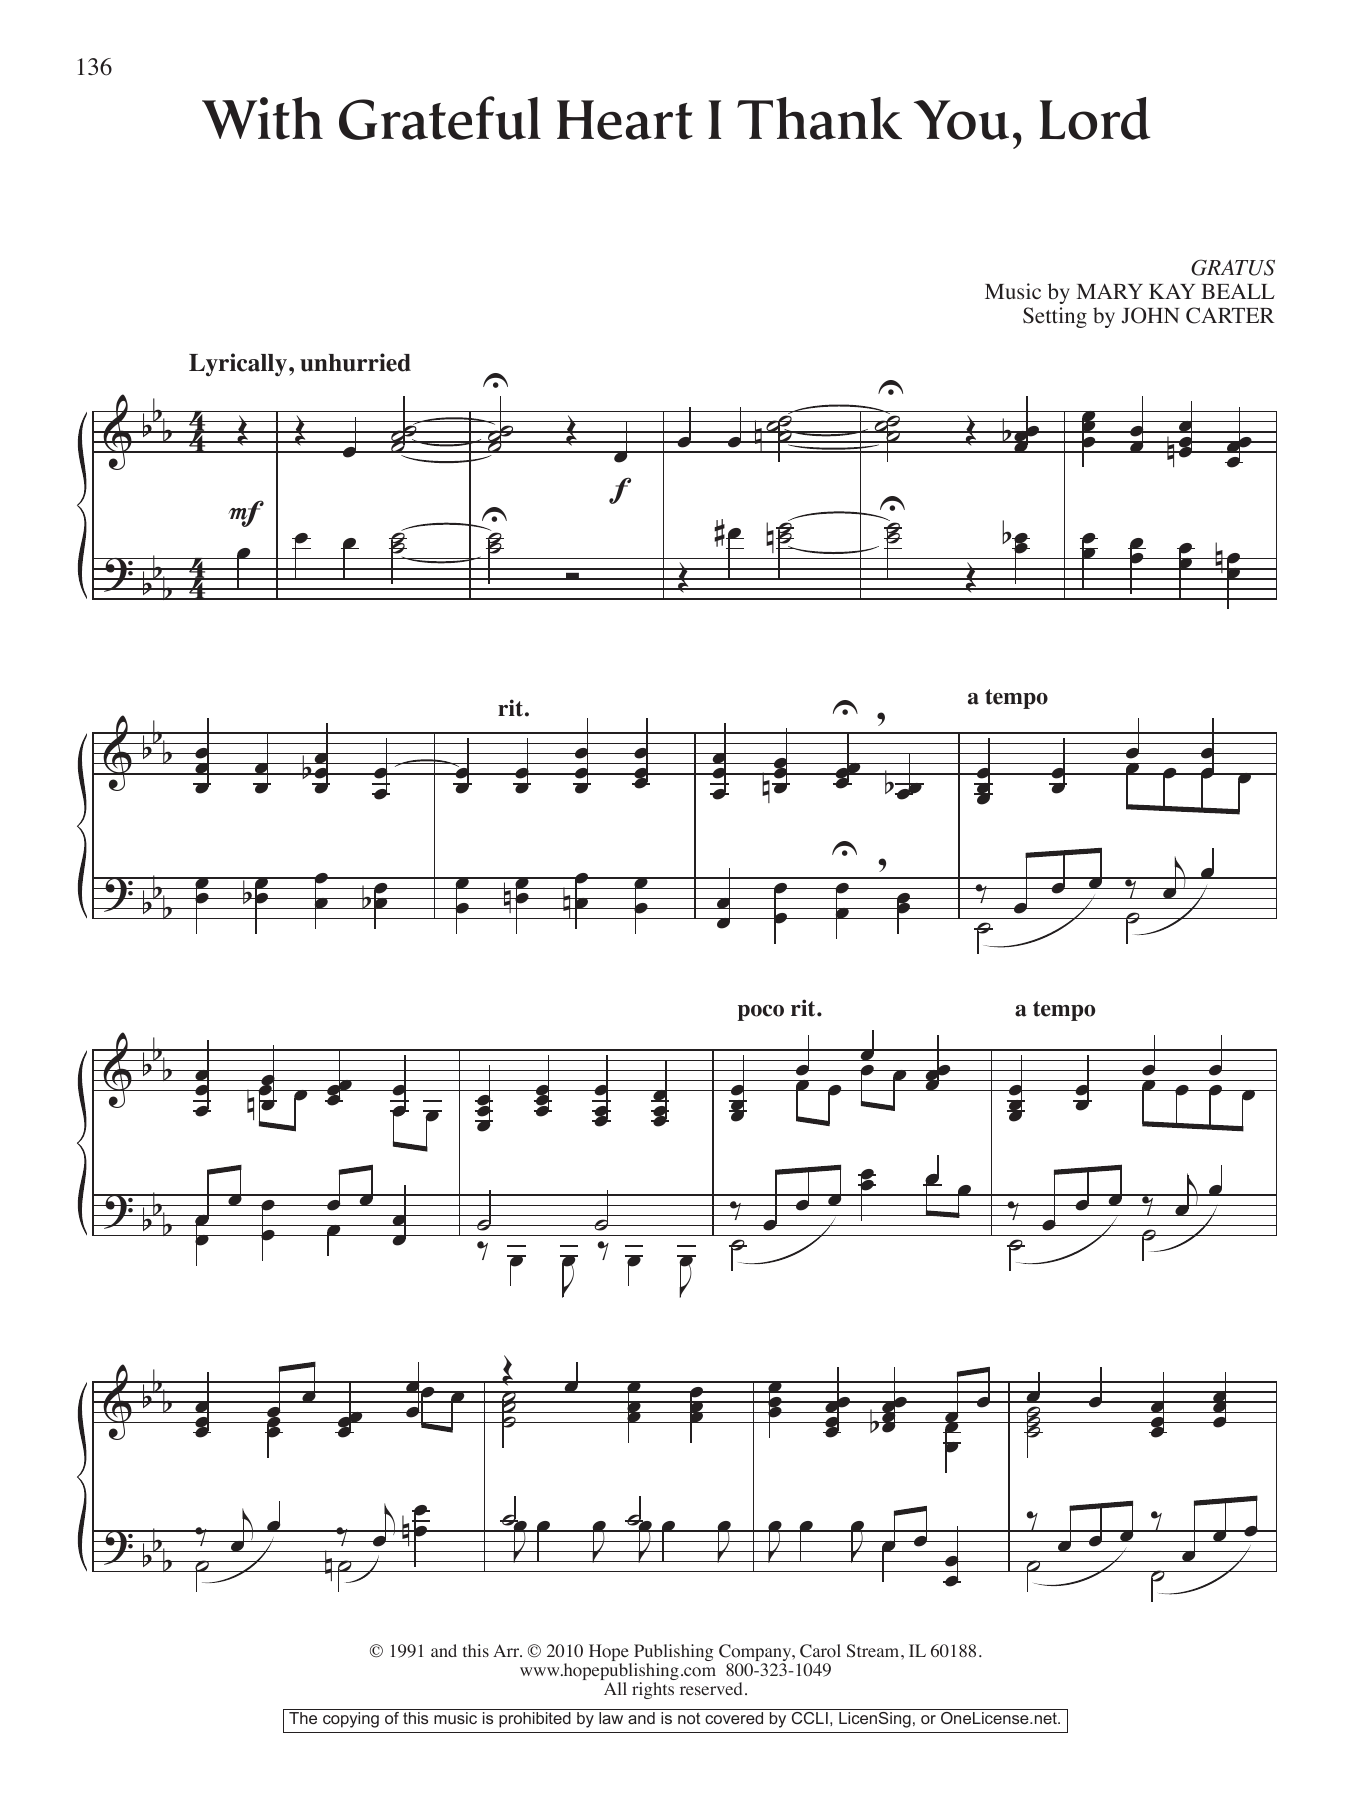 Download John Carter With Grateful Heart I Thank You, Lord Sheet Music